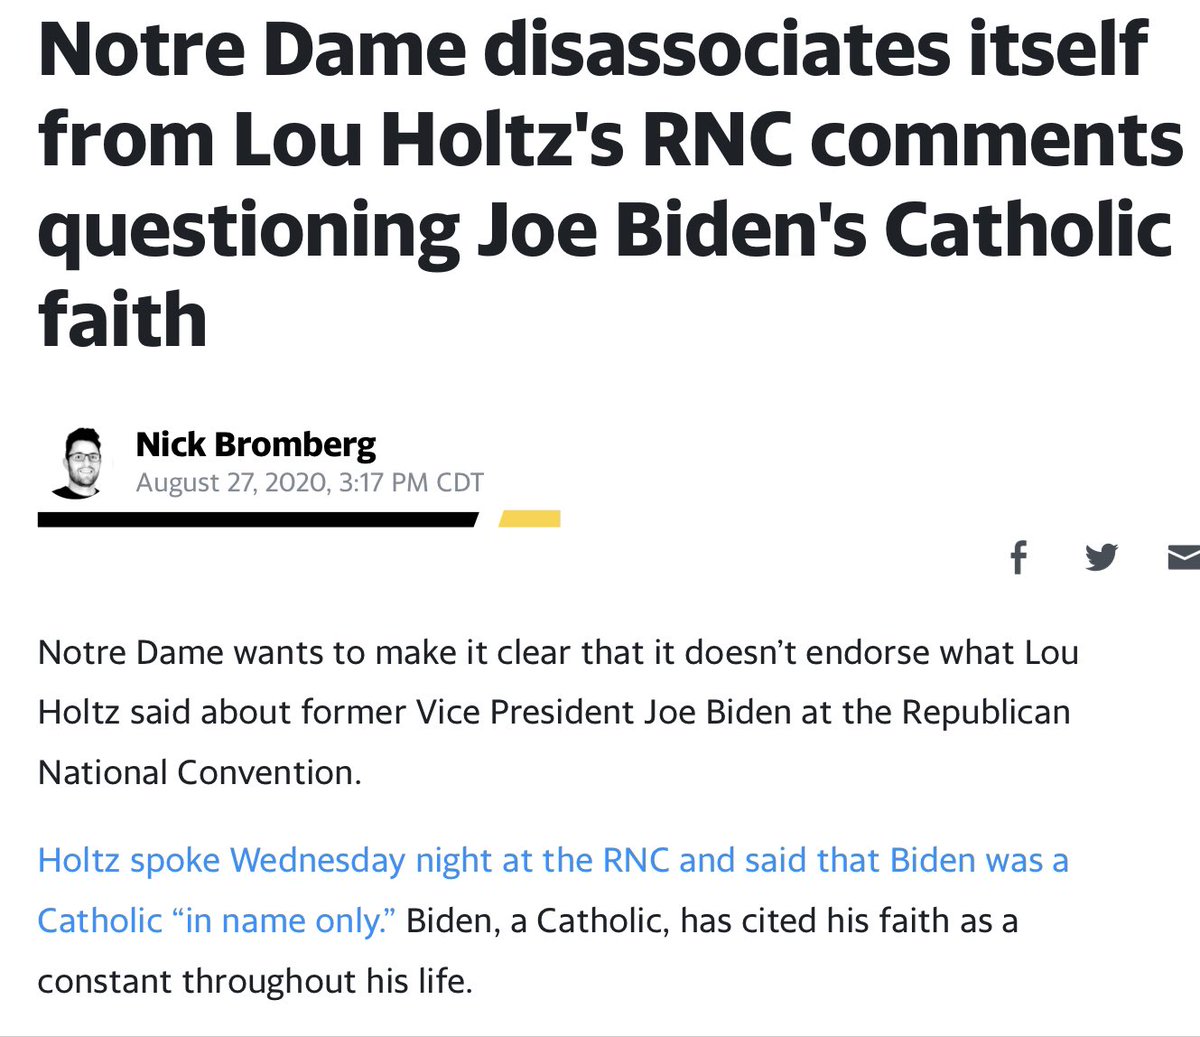 Many of us see these coaches as progressive and caring about black people...Until they retire and come out as Trump supporters like former Notre Dame coach Lou Holtz, who spat all over the mic praising Trump at the RNC as he explained how Jesus told him to support a racist